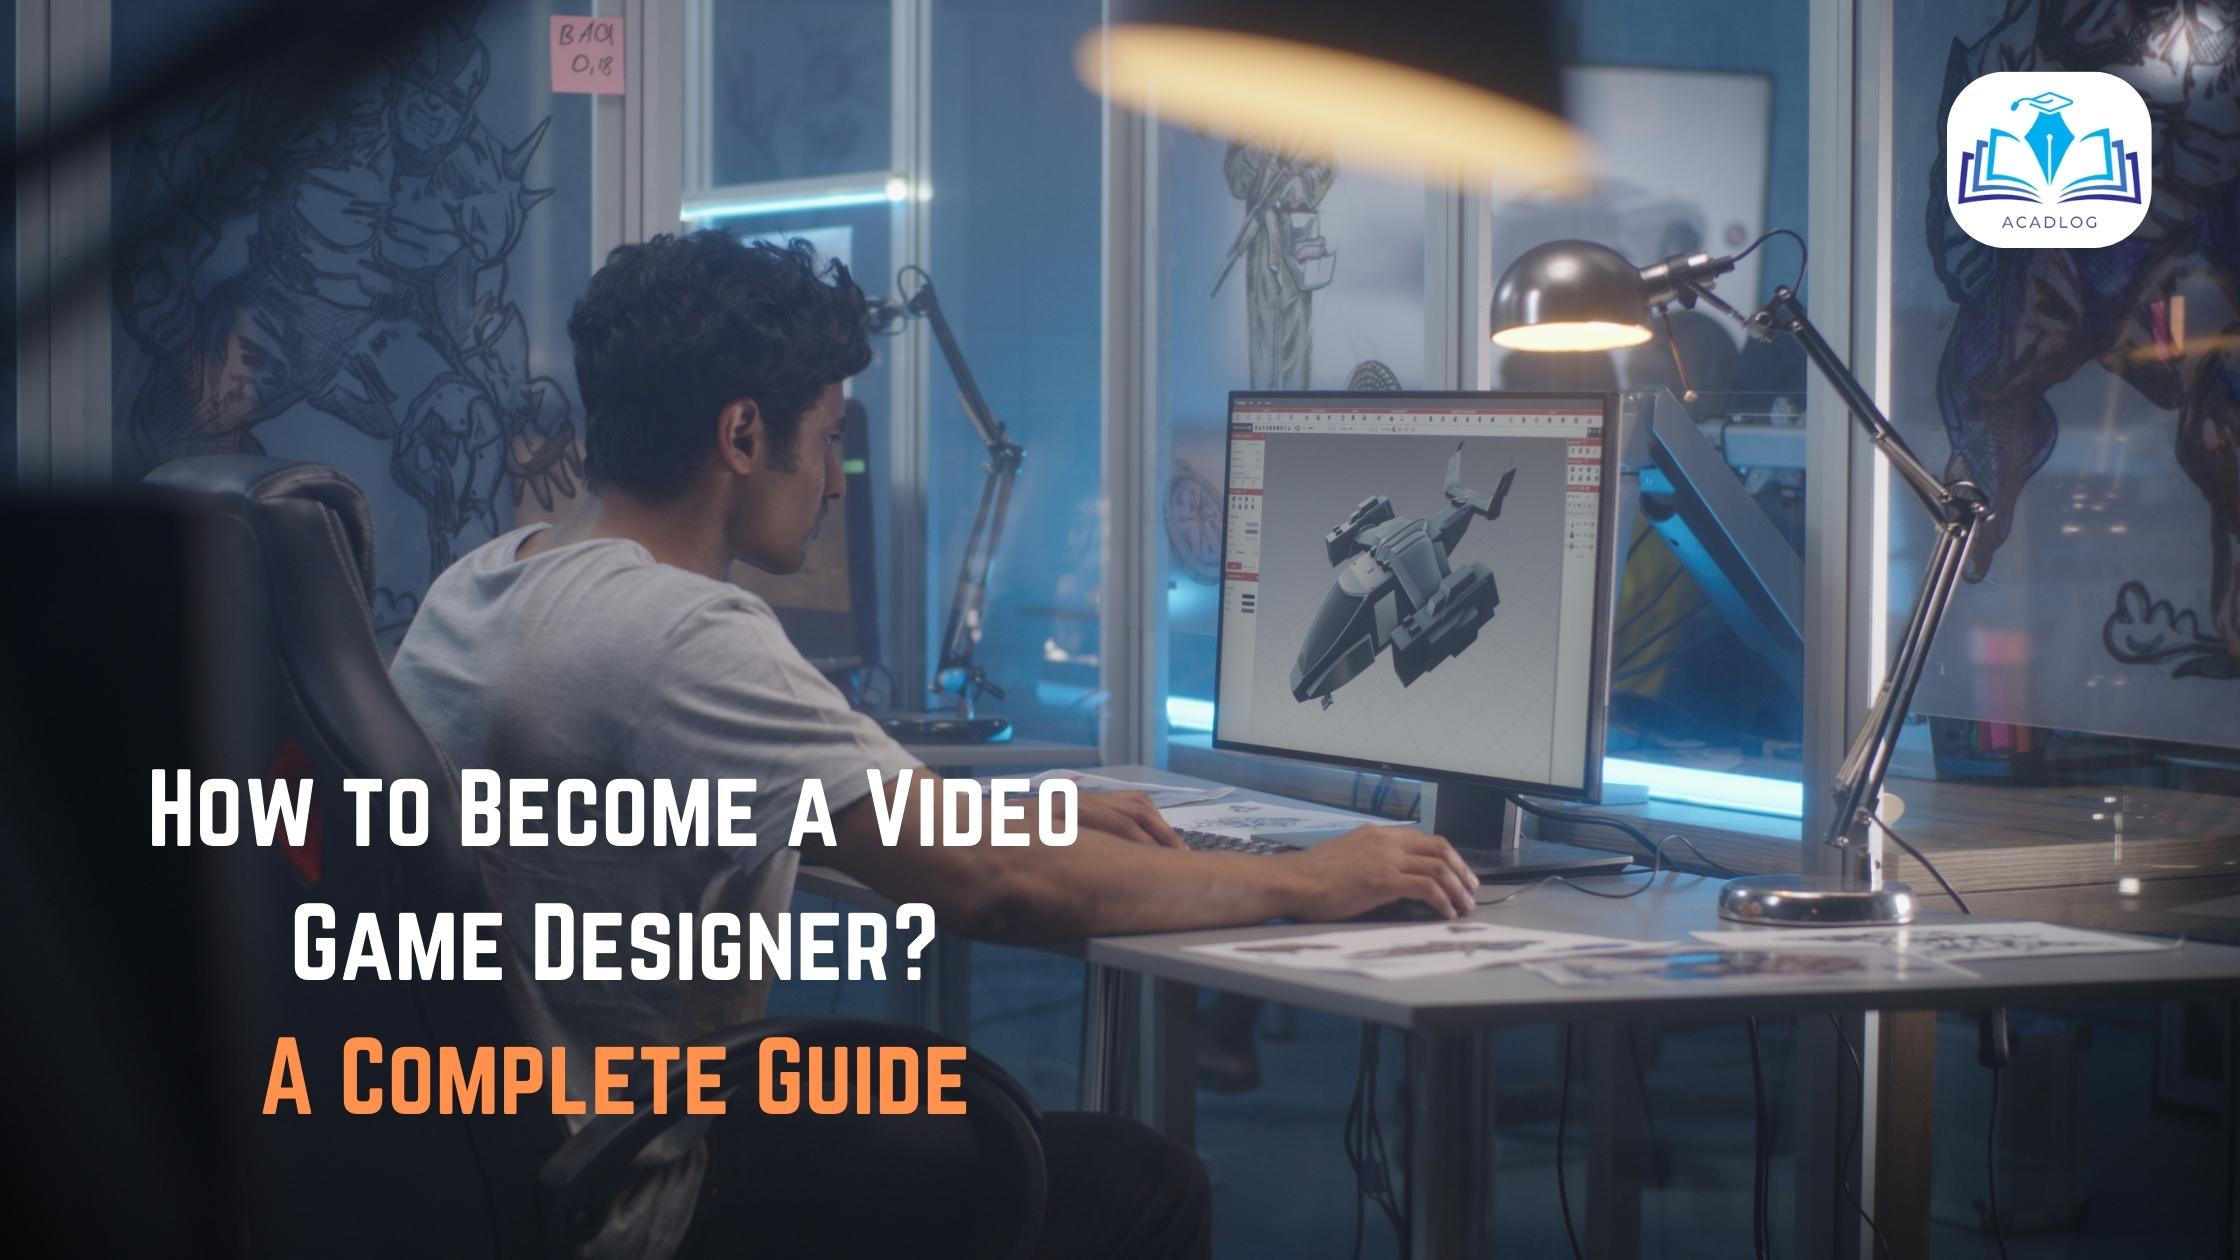 How to Become a Video Game Designer